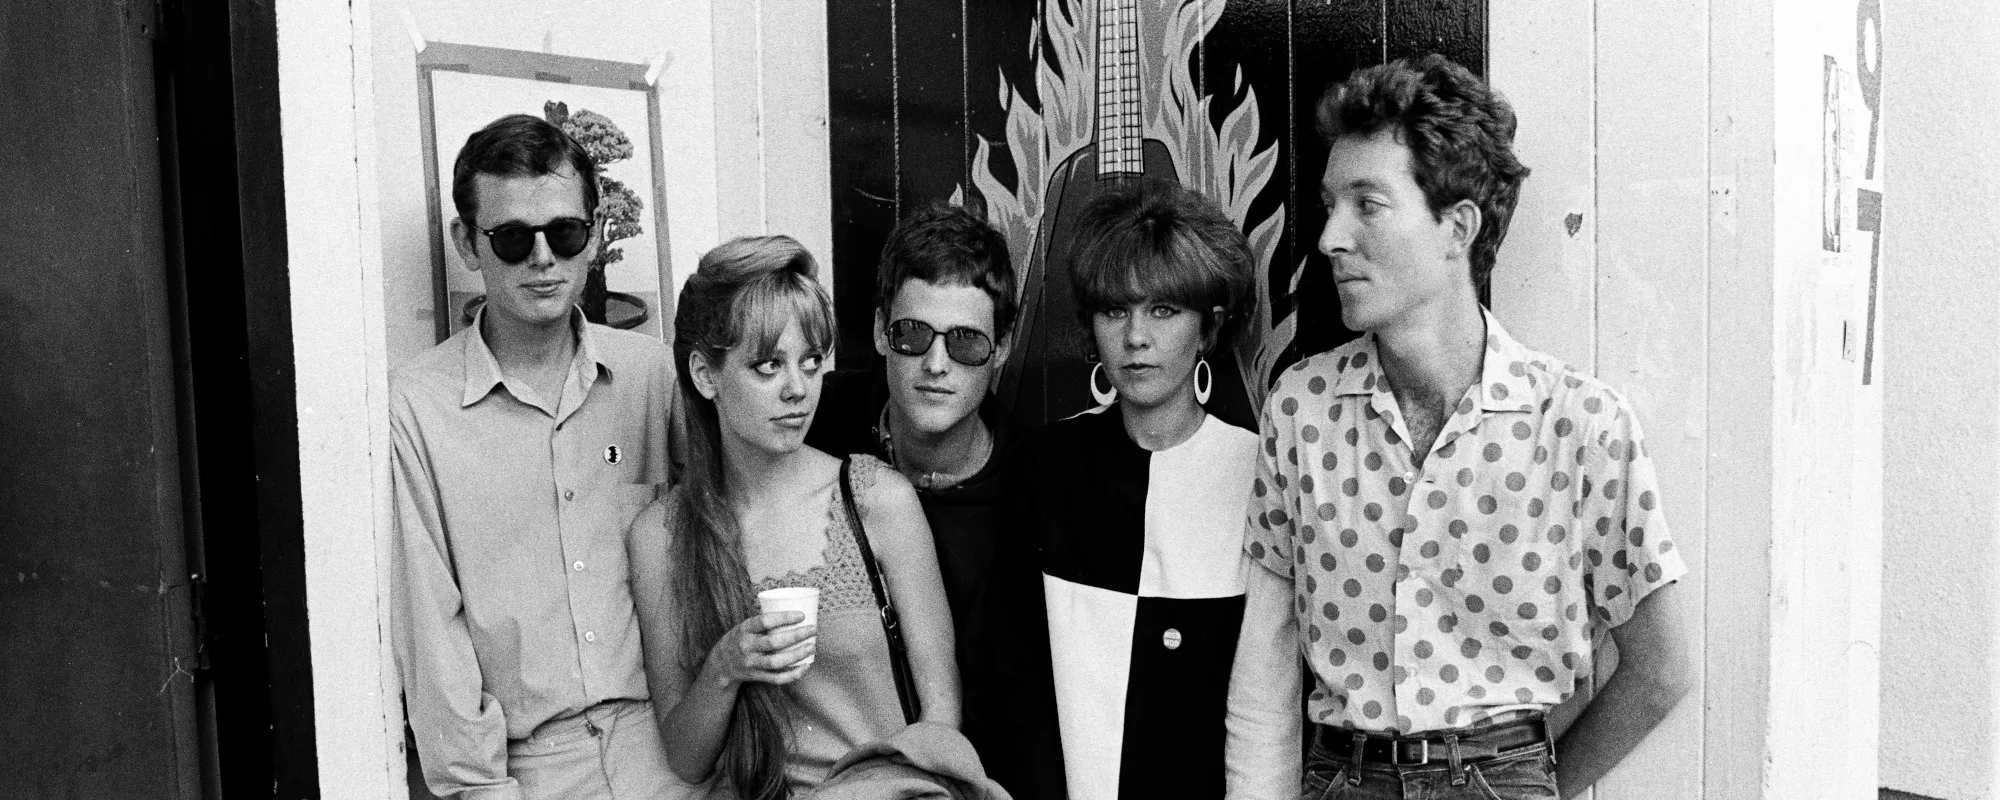 Behind the Band Name: The B-52s